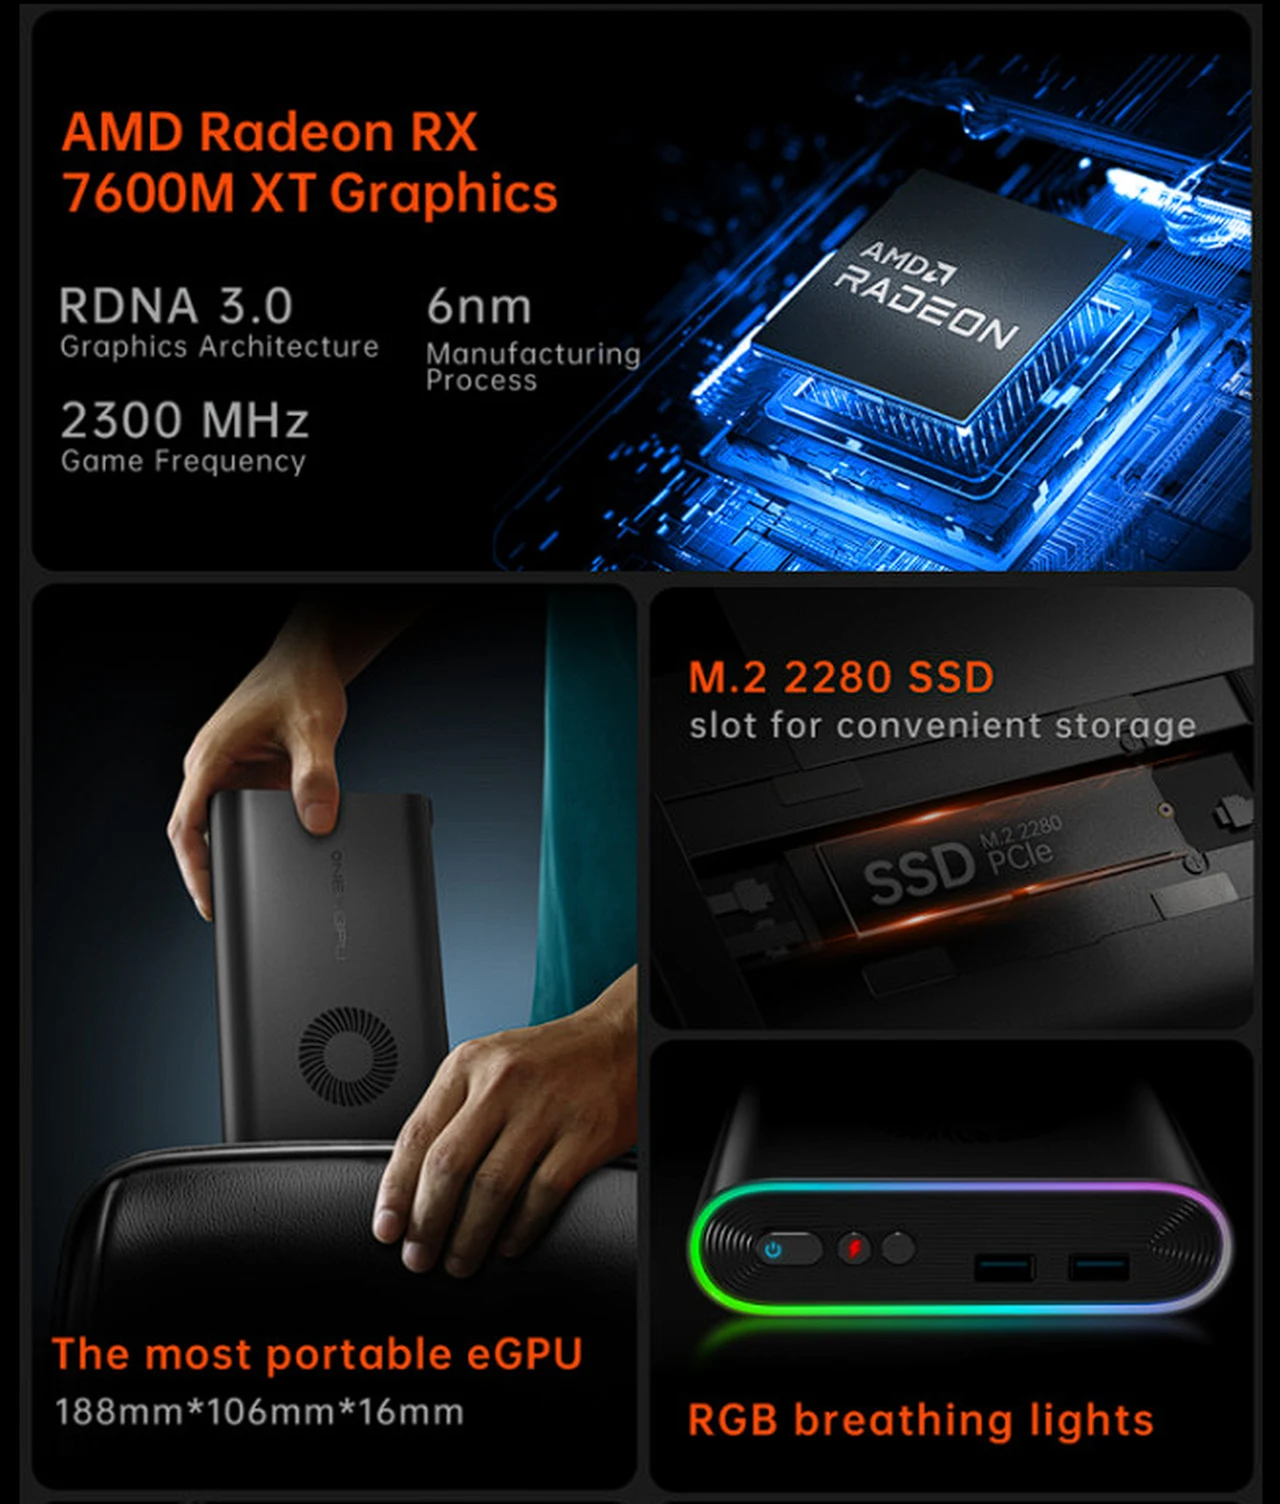 eGPU SSD features 2